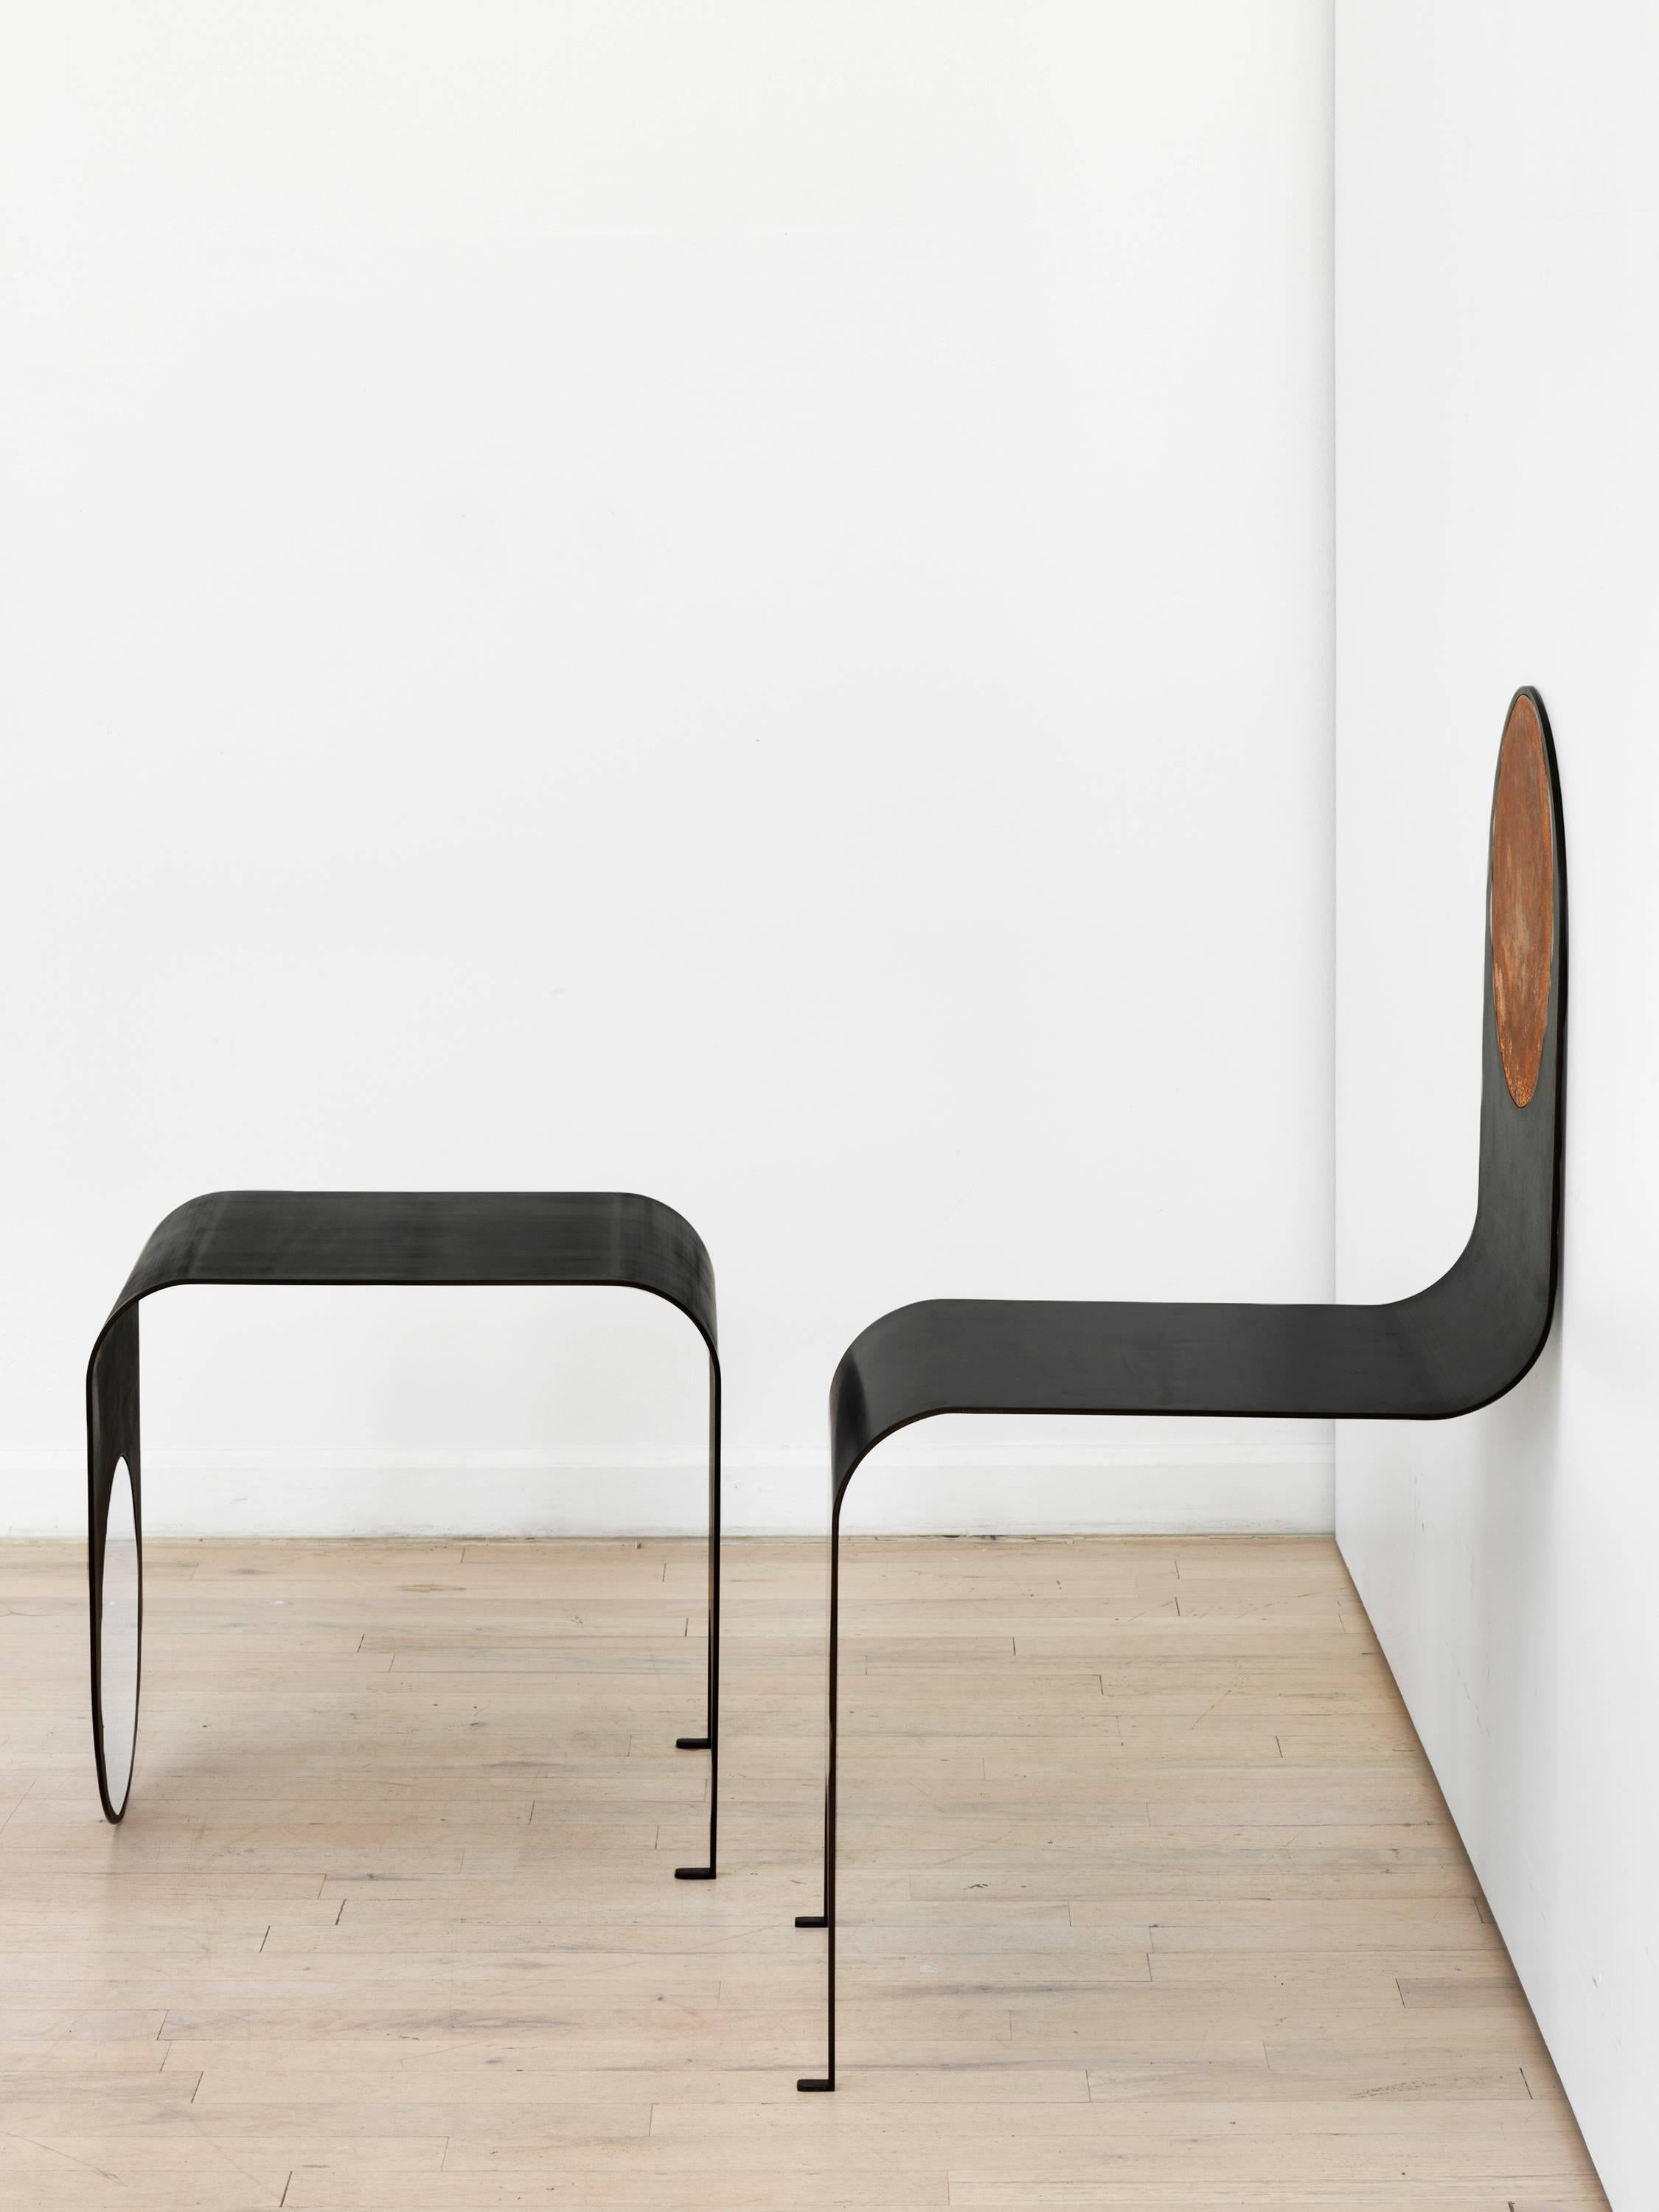 Modern Thin Table 1 in Contemporary Blackened Steel and Polished Steel, Made to Order For Sale